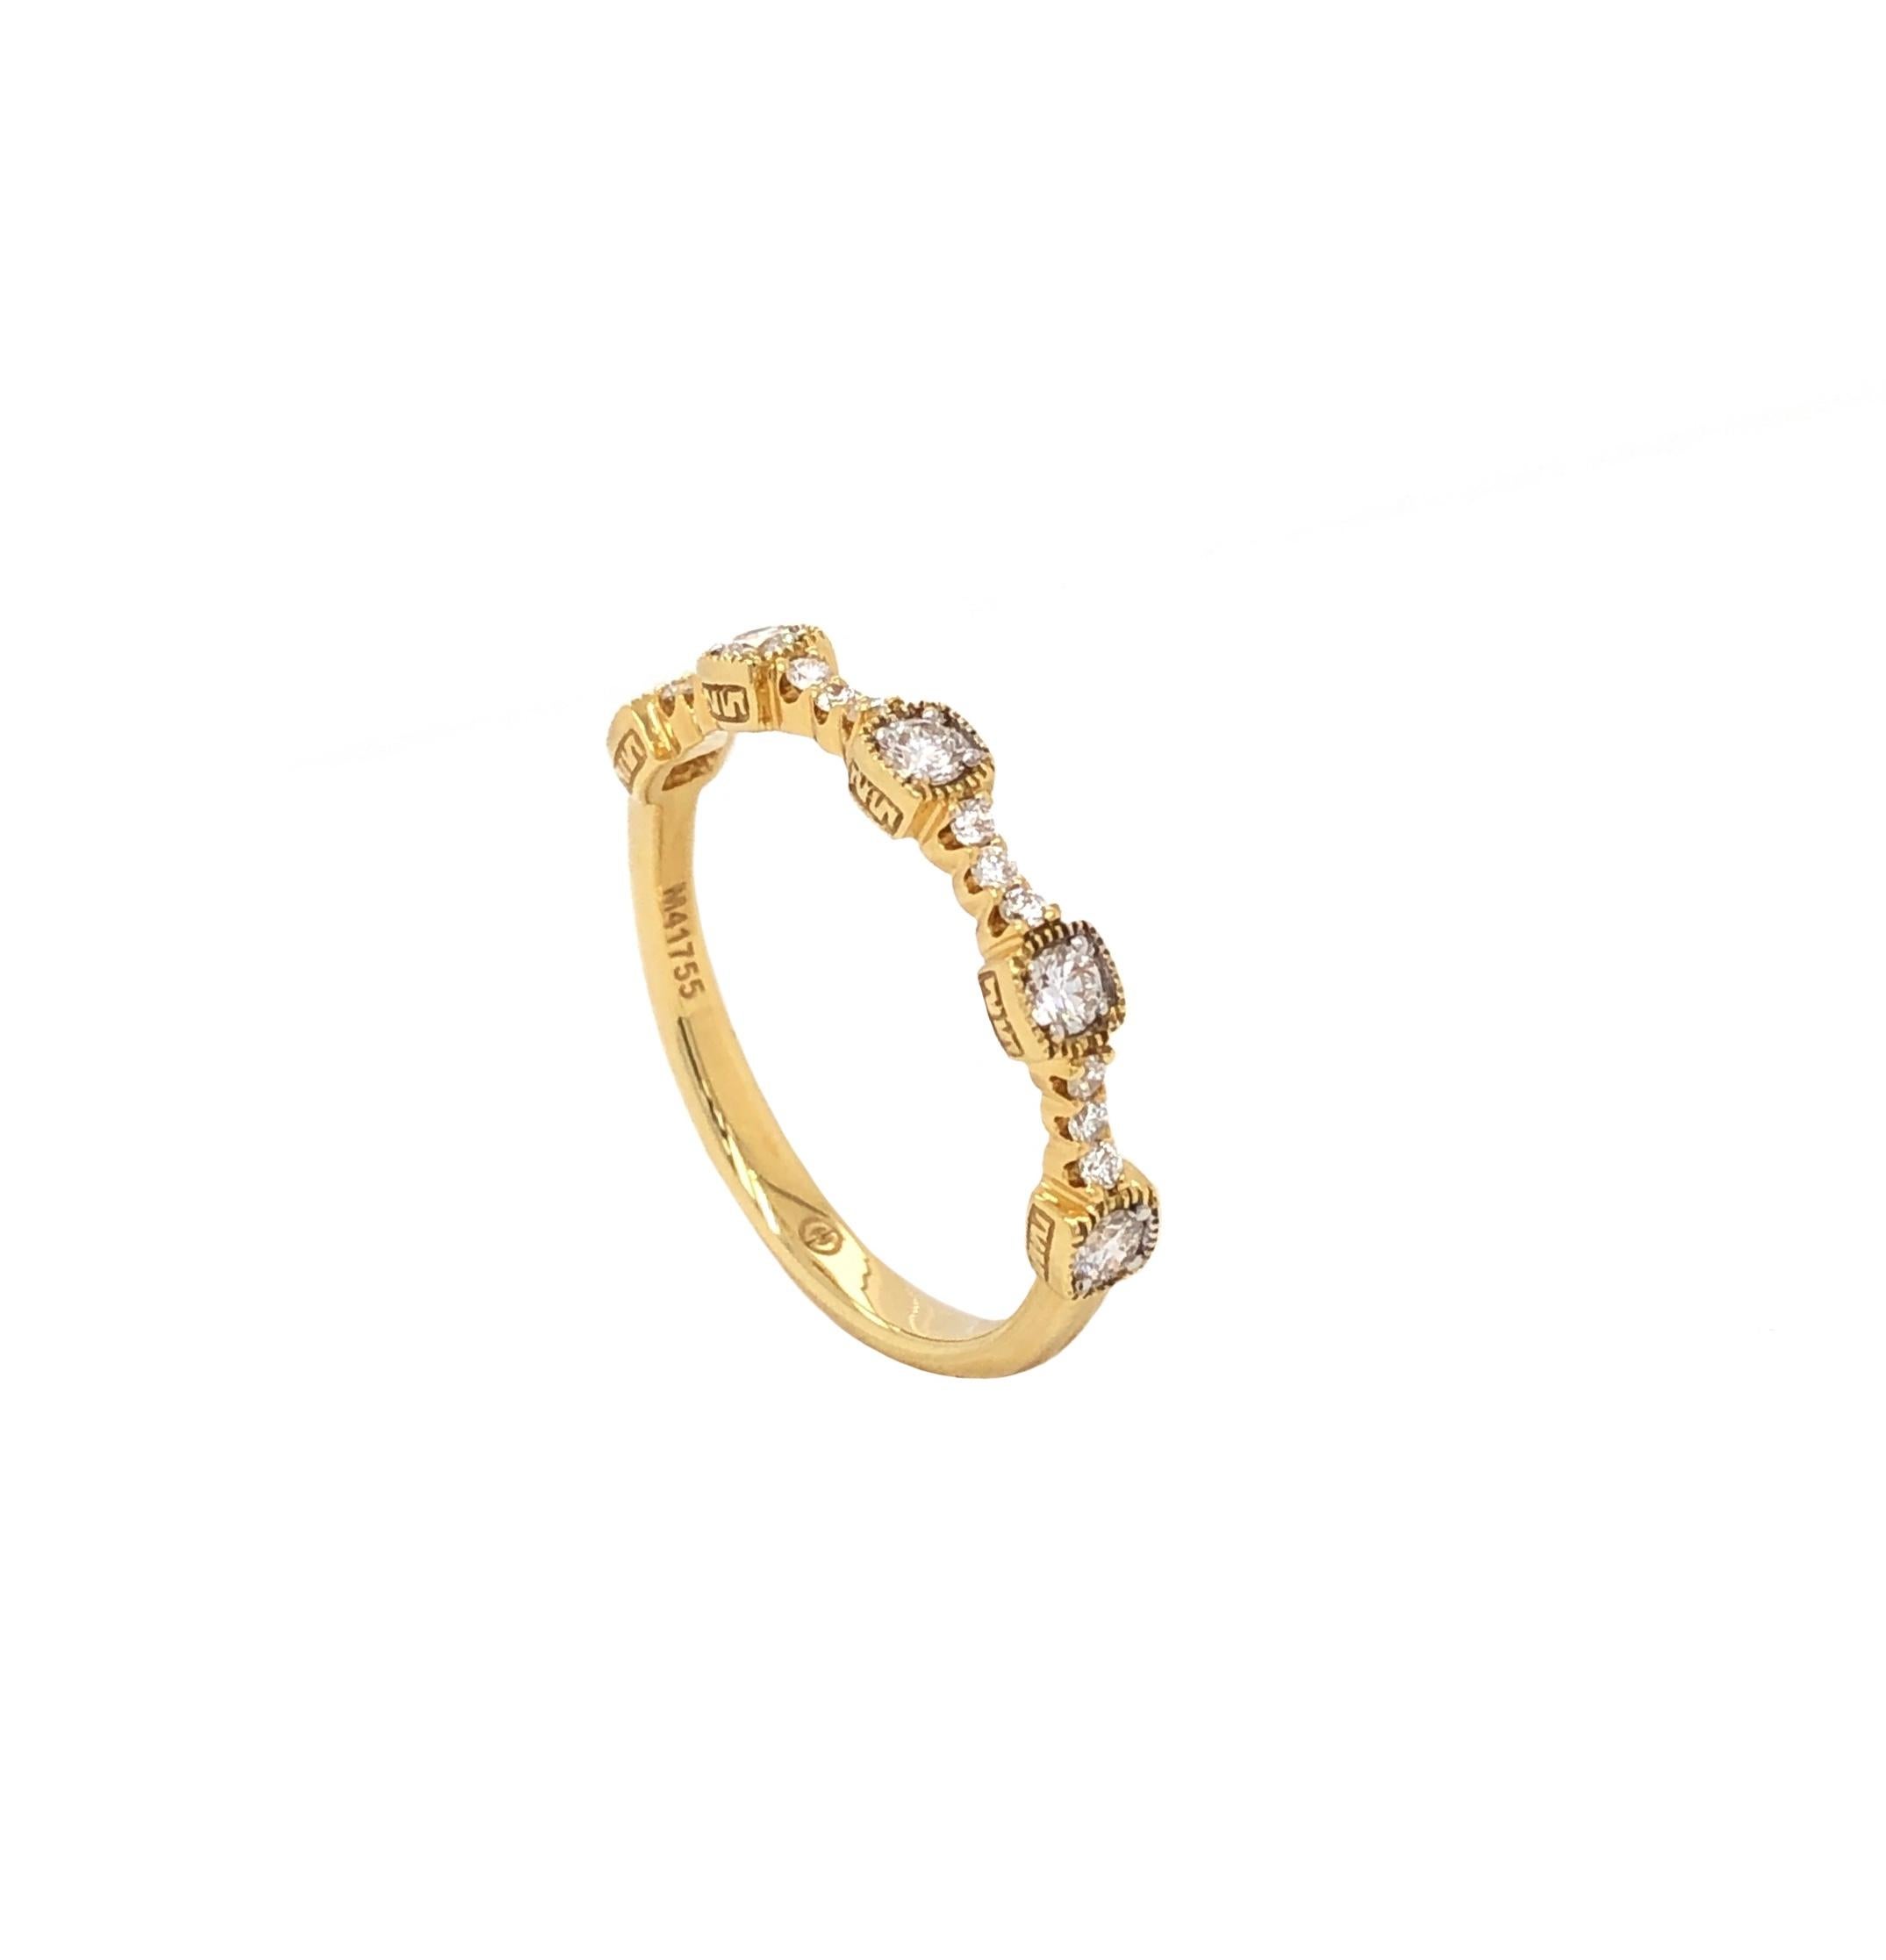 Christopher Designs Stackable Diamond Band  18K Yellow Gold, 
17Round Brilliant Cut Diamonds equal to 0.25ctw
G in Color SI 1 in clarity
3.1 mm tapering to 2.5 mm
Serial # M41755   
Size 6
These are available in Rose Gold and White Gold, Also